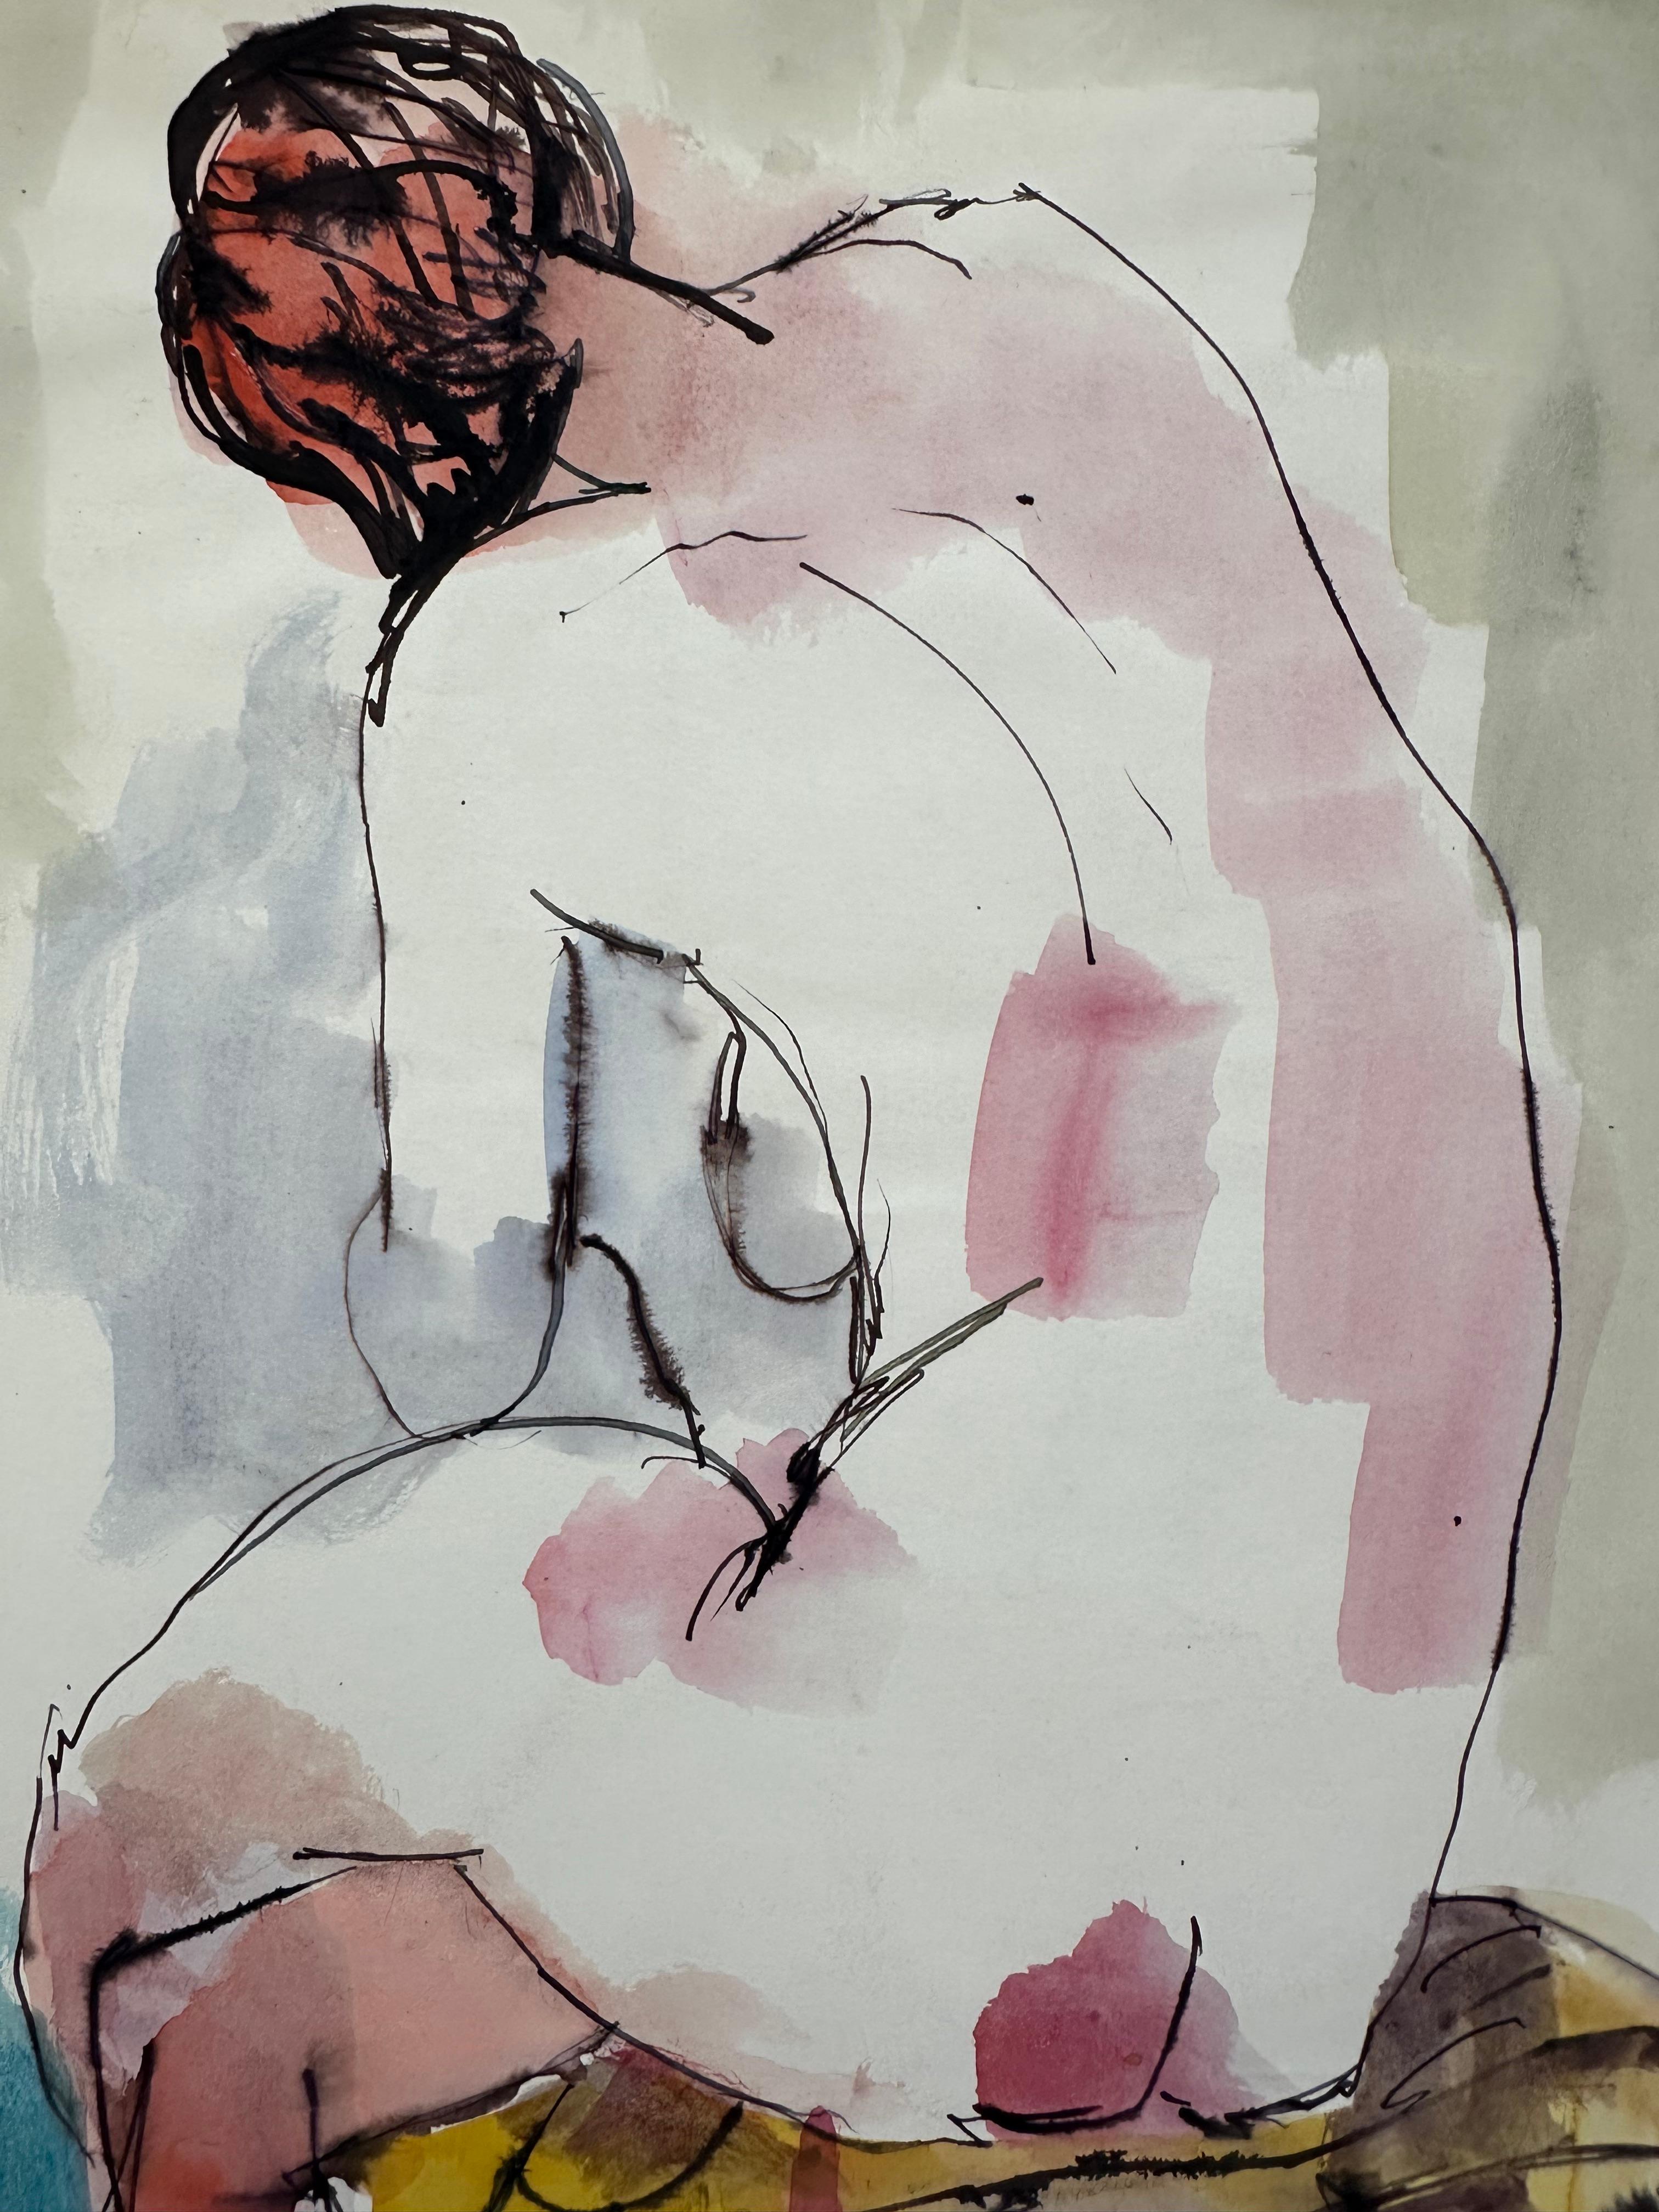 Joseph Kardonne (1911-1985). Nude Woman, 1967. Watercolor on paper, sheet measures 11.25 x 17.25 inches.  Signed, dated and titled lower right. Excellent condition.

Born in Newark, New Jersey in 1911, Joe Kardonne first showed an interest in art at